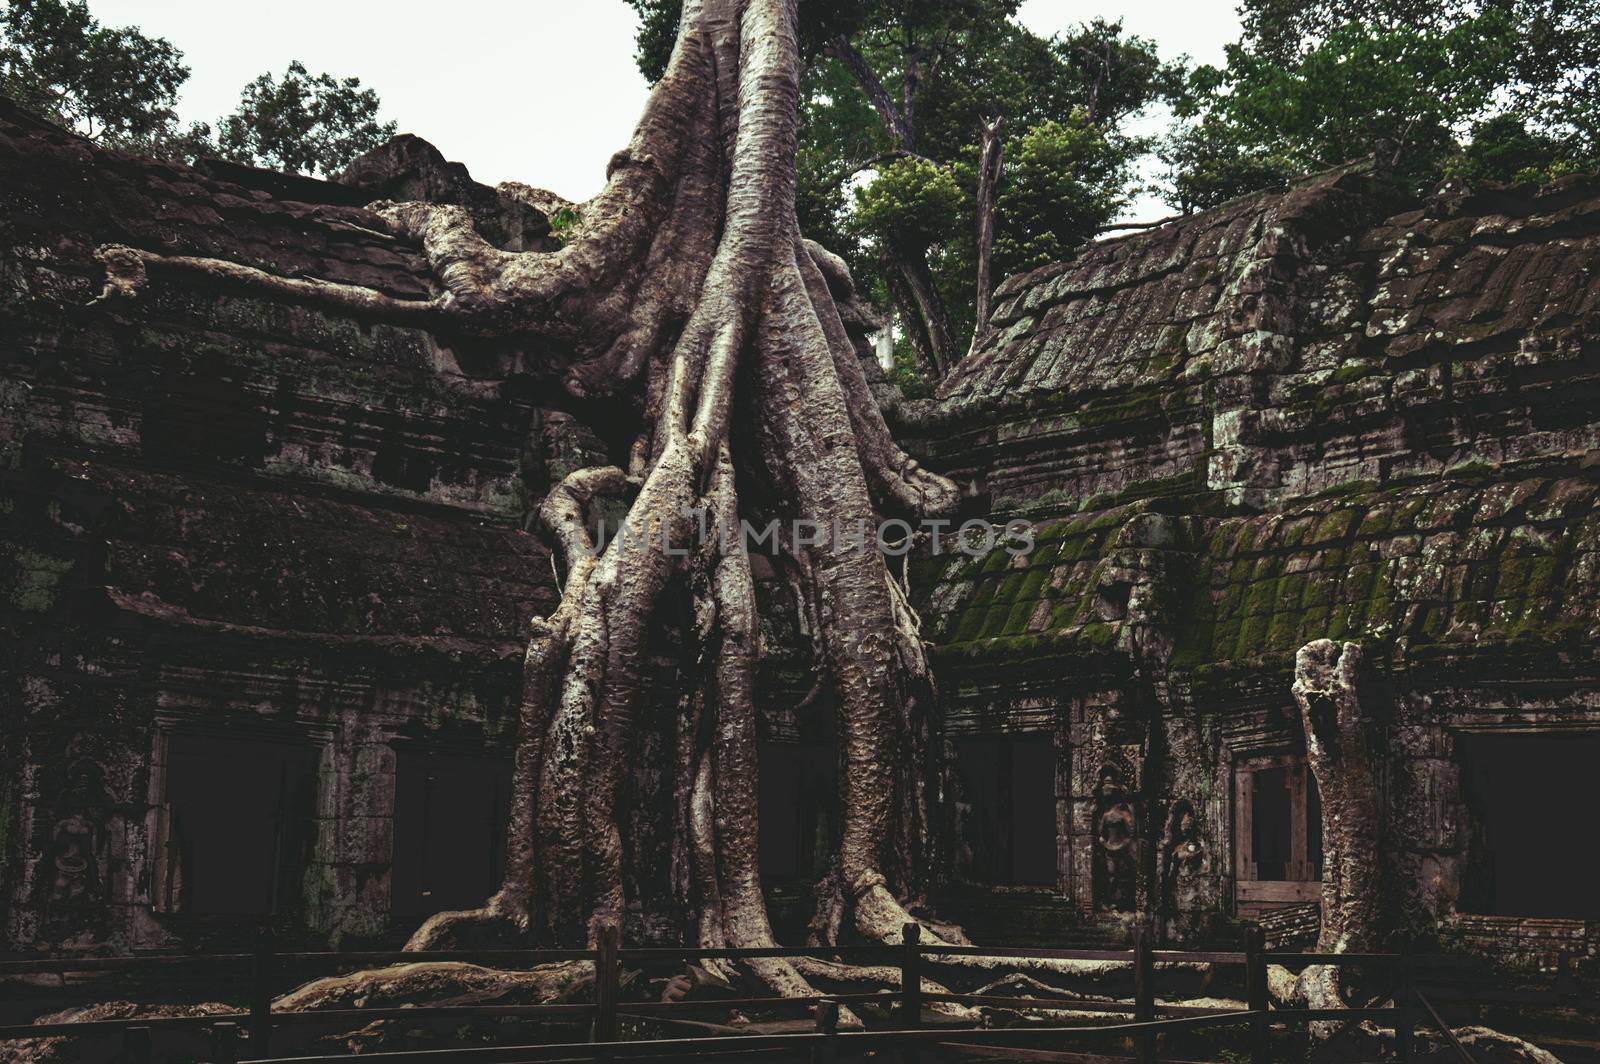 Banyan tree in the famous Ta Prohm in Angkor Archaeological Park, Krong Siem Reap Cambodia